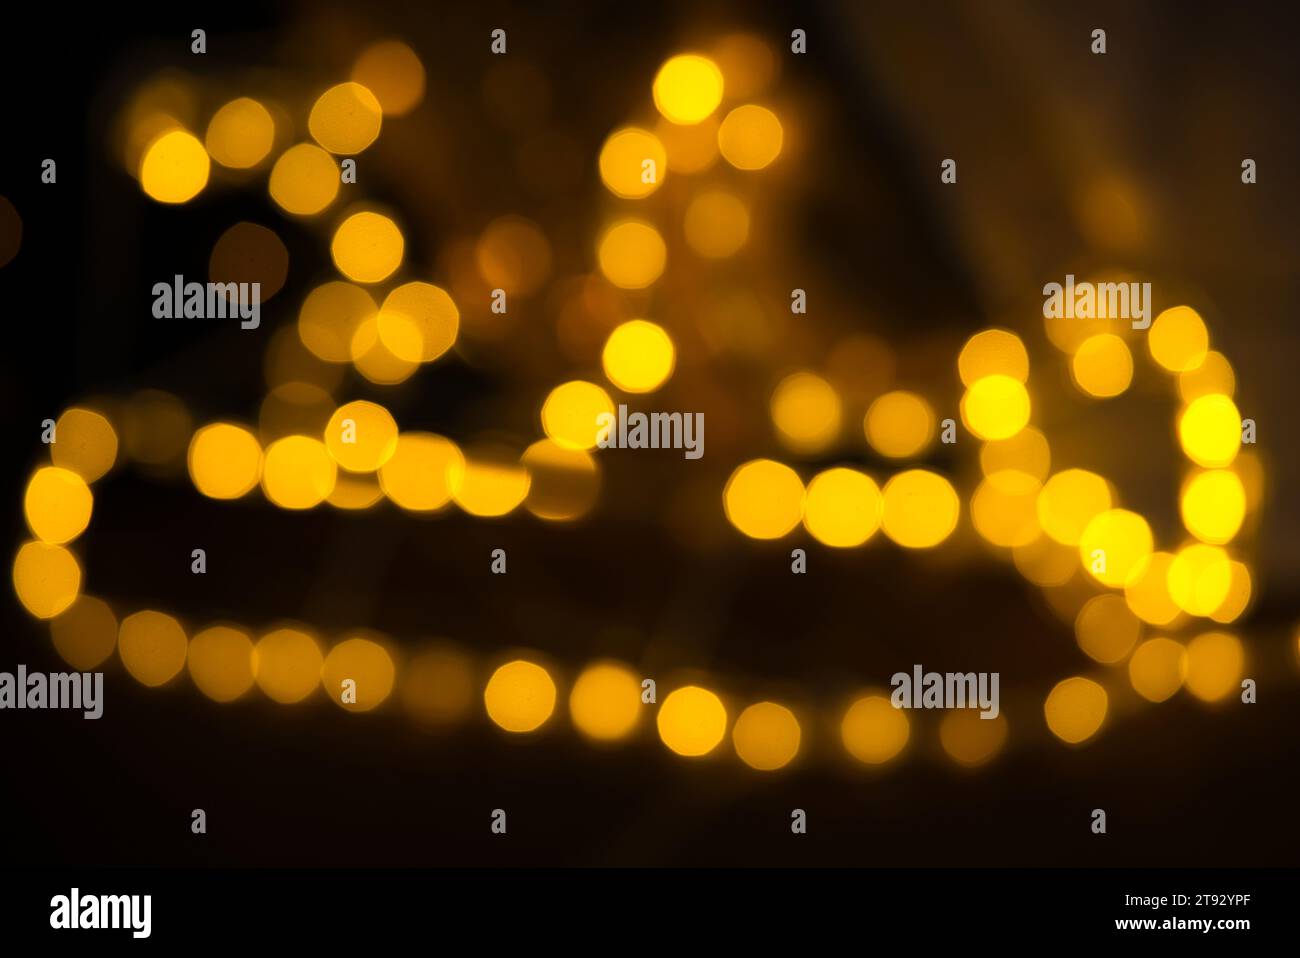 Delight in the festive charm of this bokeh, captured with a 75mm lens, shaping a whimsical sleigh from closely packed glowing ovals and nonagons. The Stock Photo